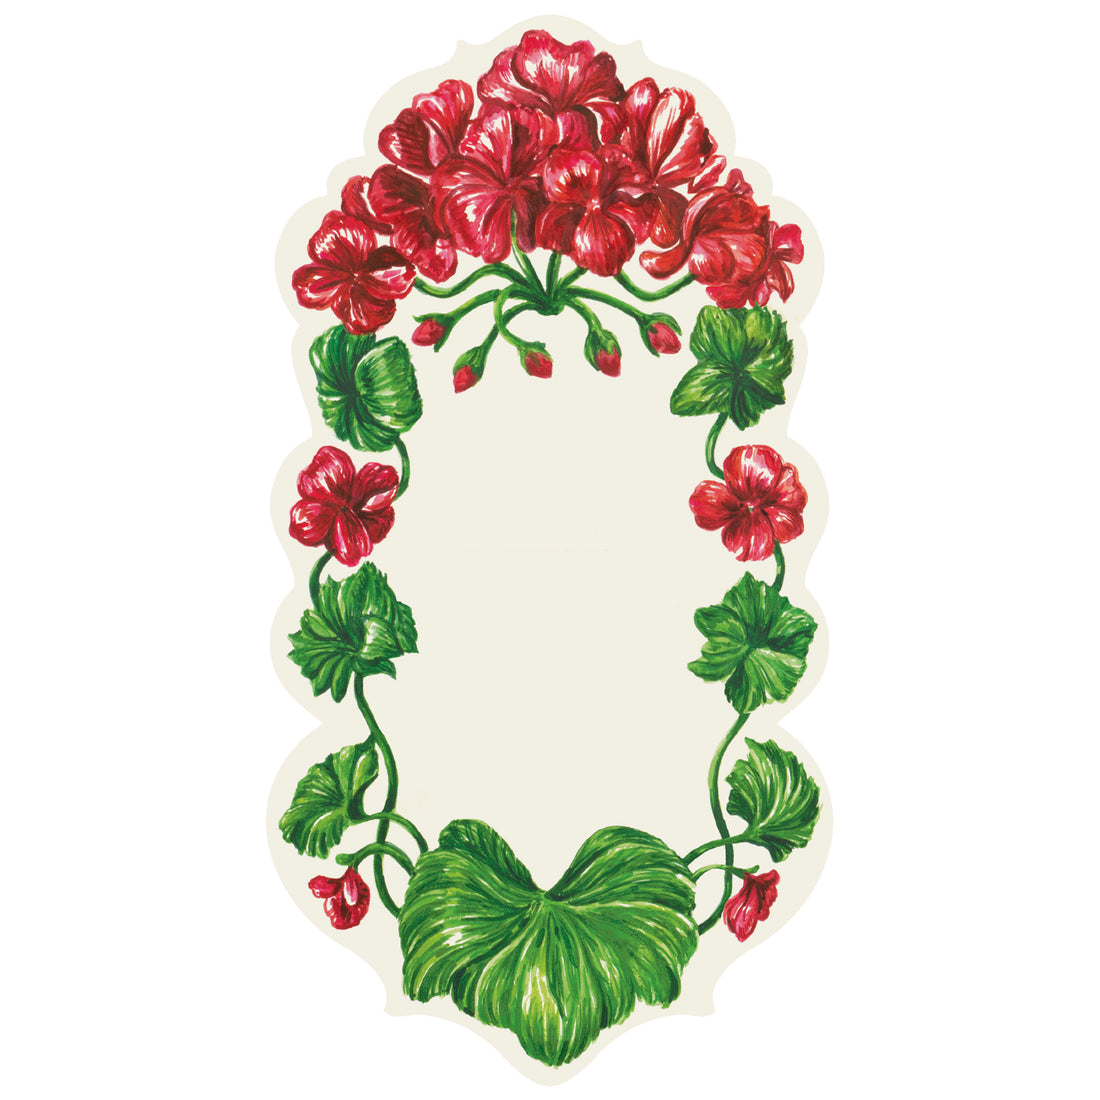 A die-cut white table accent framed by illustrated red geranium blooms and green leaves and stems, leaving a blank area in the middle for personalization.